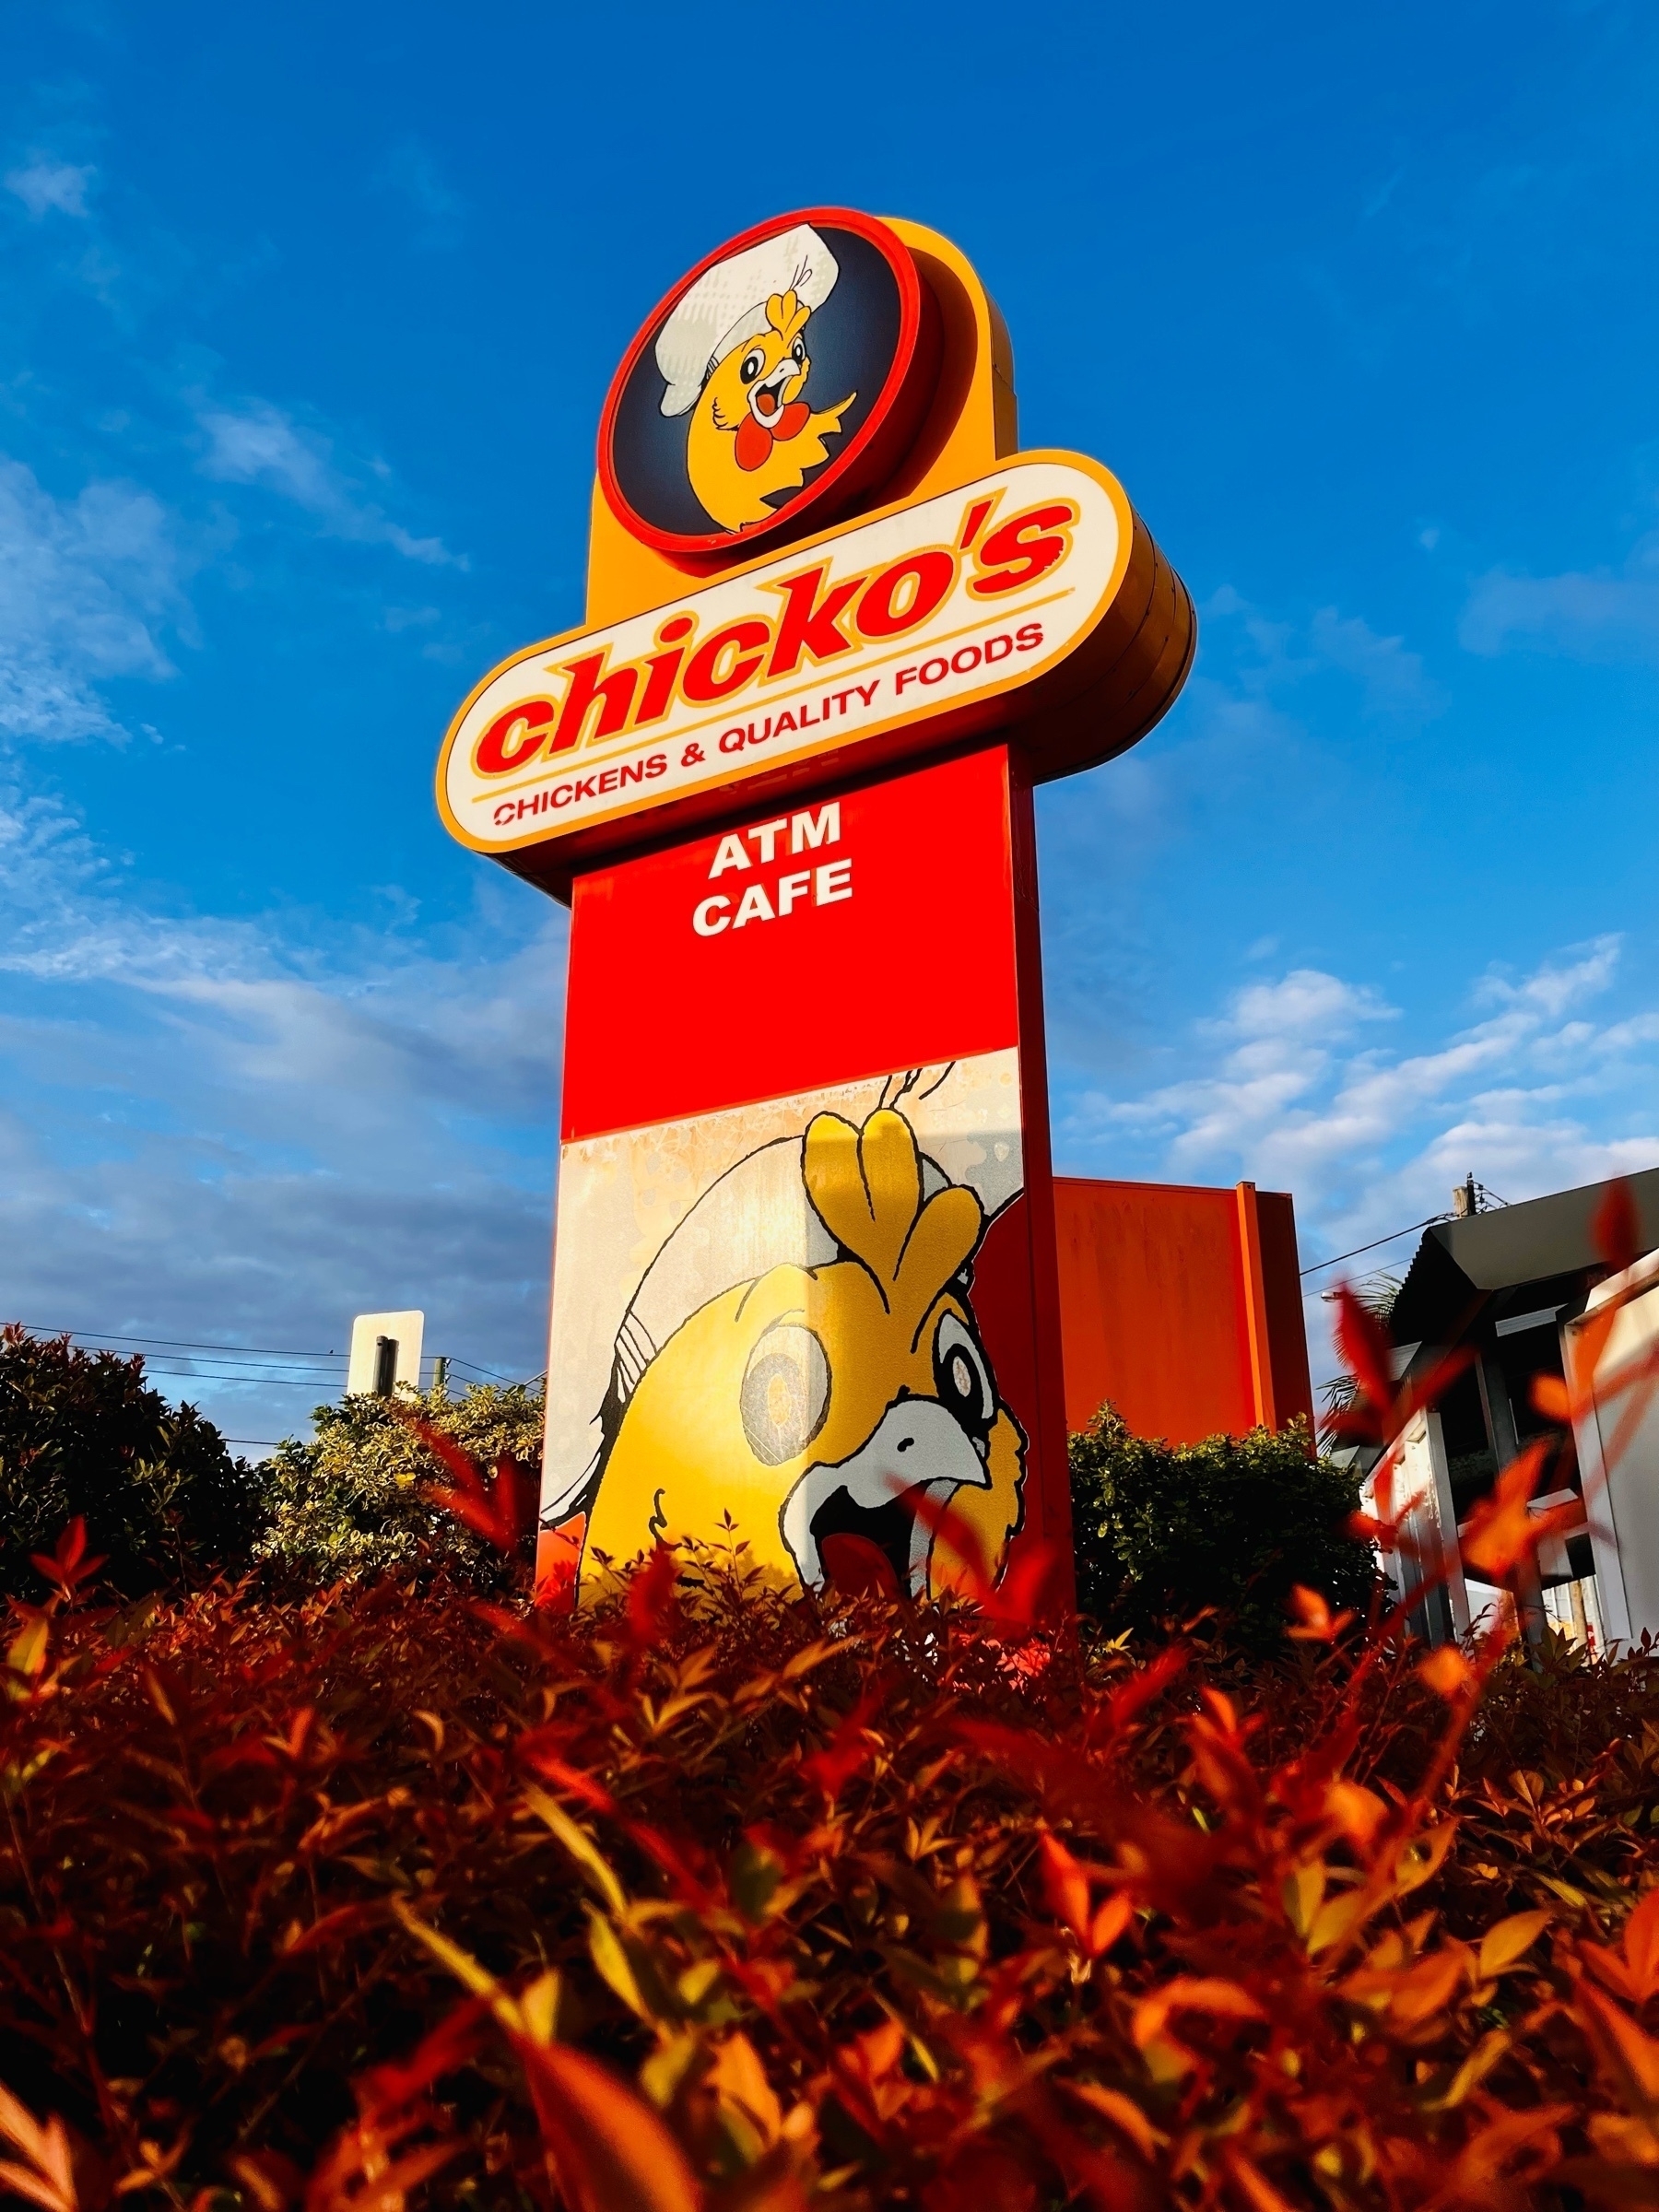 A giant sign that says Chicko's, displaying a disembodied chicken head with a chef's hat